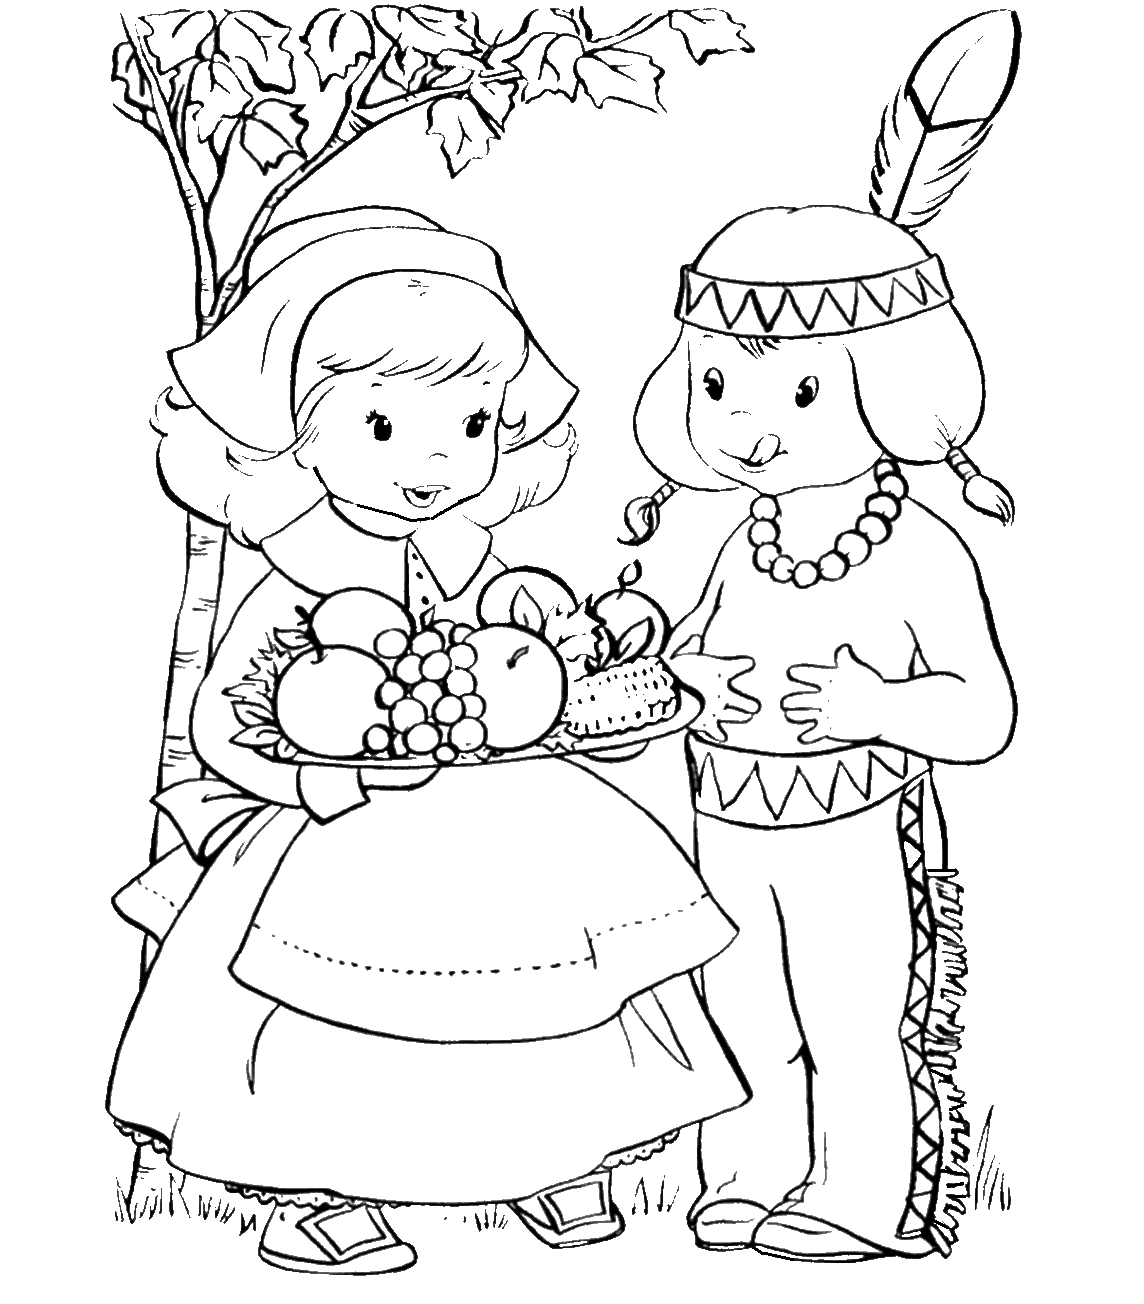 Indian Coloring Pages indians_55 Printable 2021 3550 Coloring4free